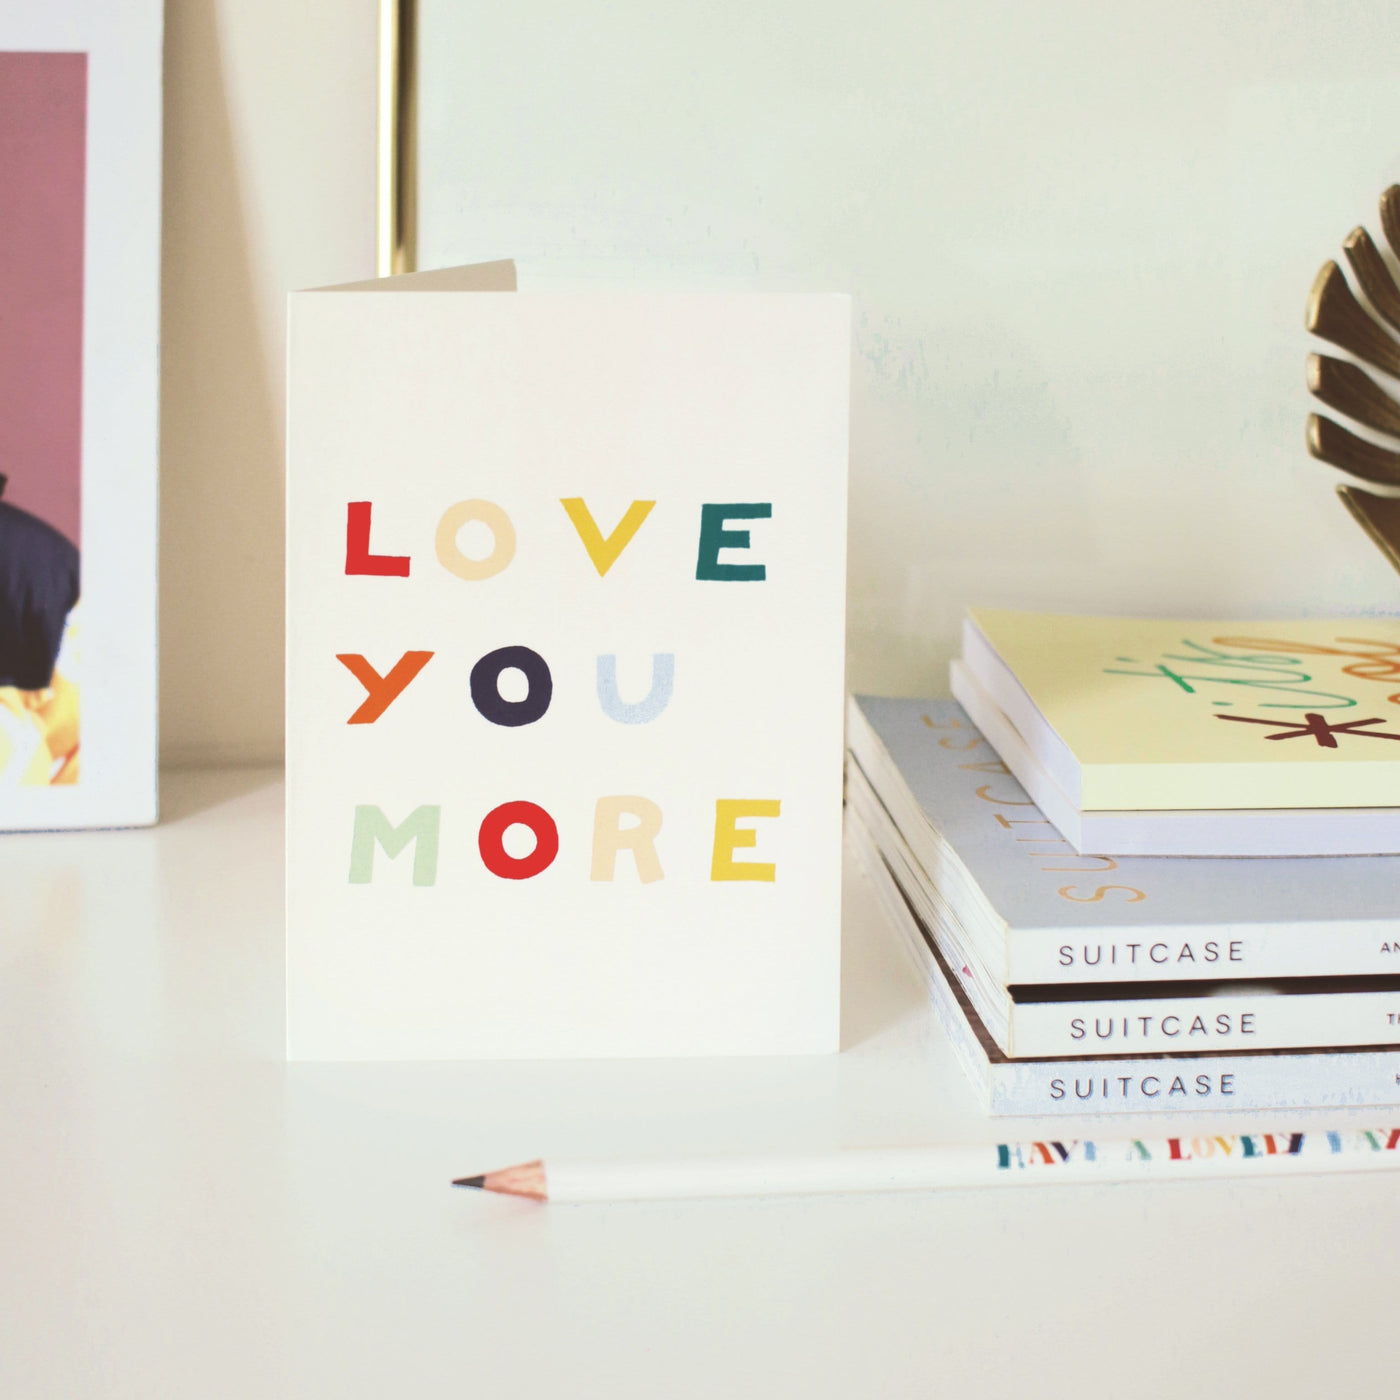 A Hand Lettered Rainbow Typography Card Reading Love You More Next To A Pile Of Books - Annie Dornan Smith